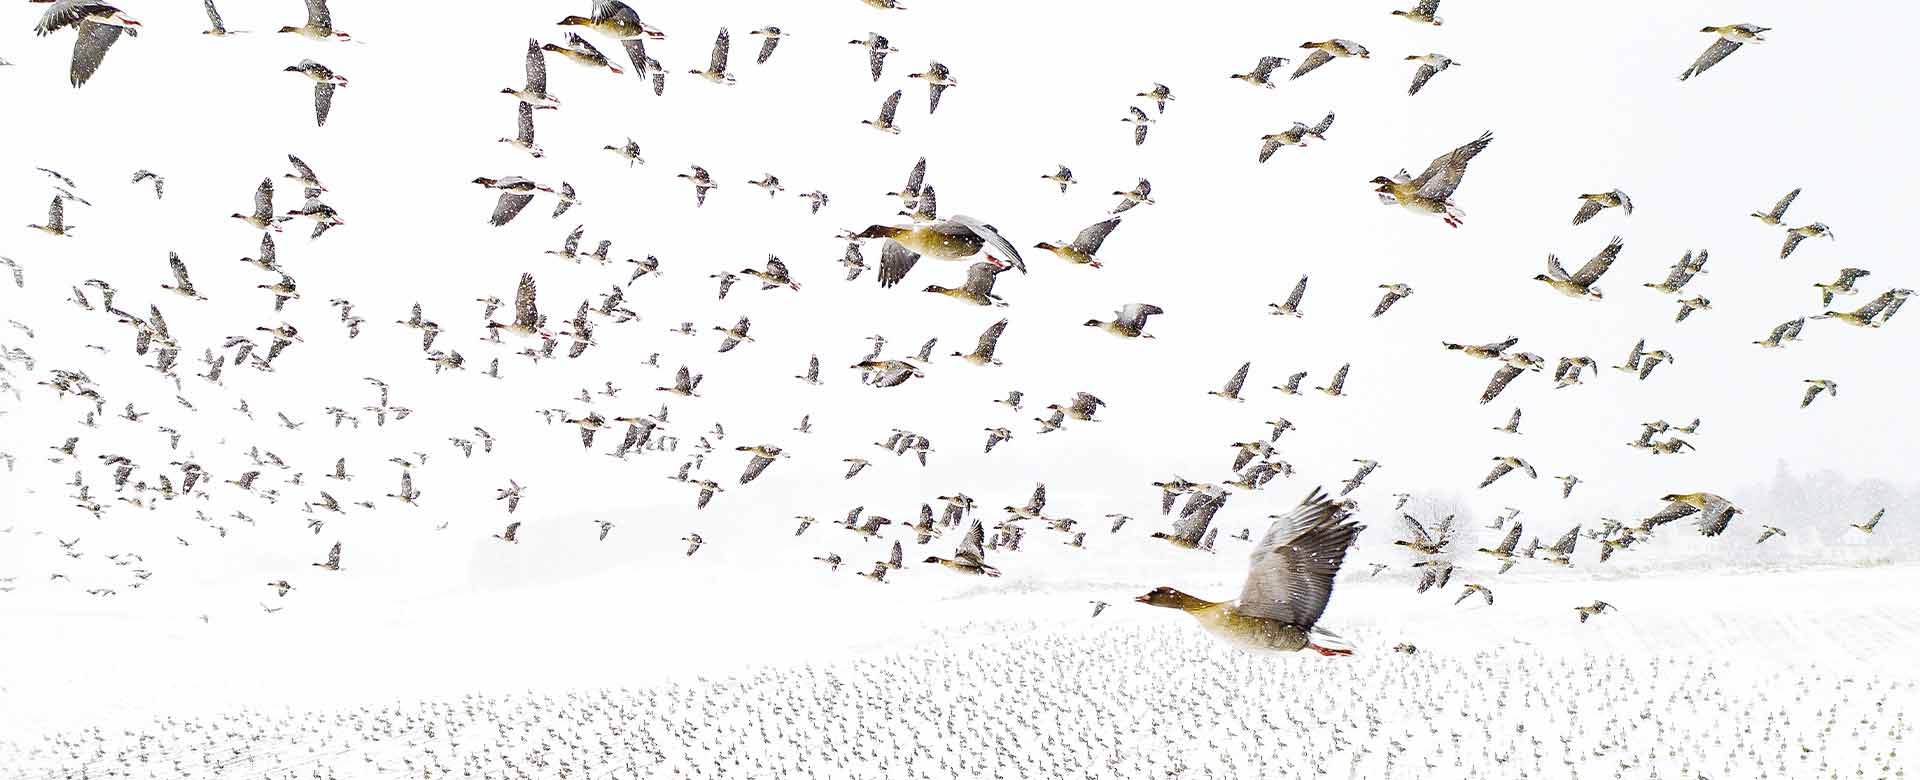 Drone Photo Awards - Foto dell’anno: Terje Kolaas, Pink-Footed Geese Meeting the Winter